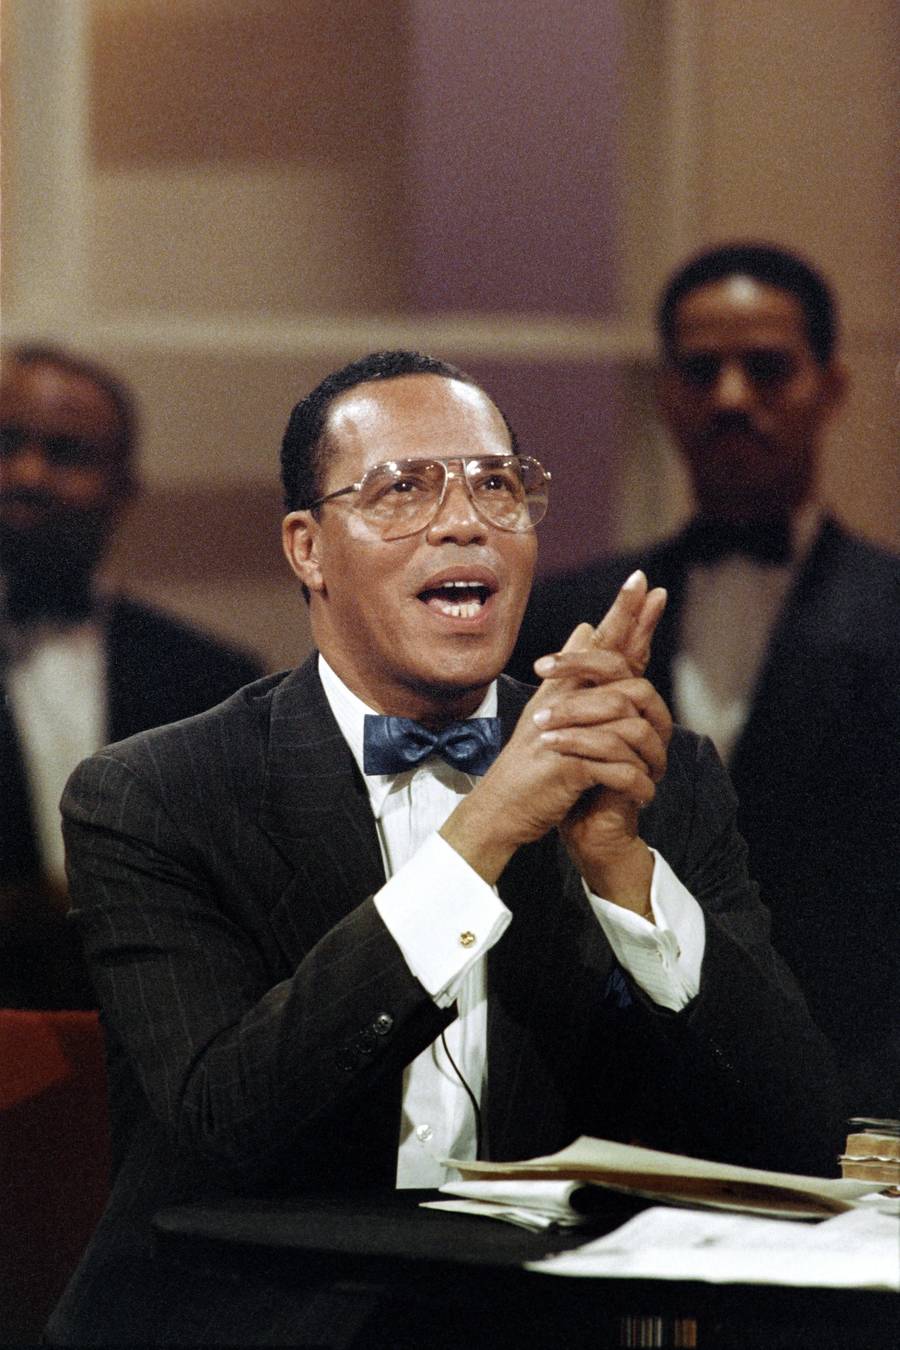 Louis Farrakhan on the ‘Phil Donahue’ television show, March 13, 1990